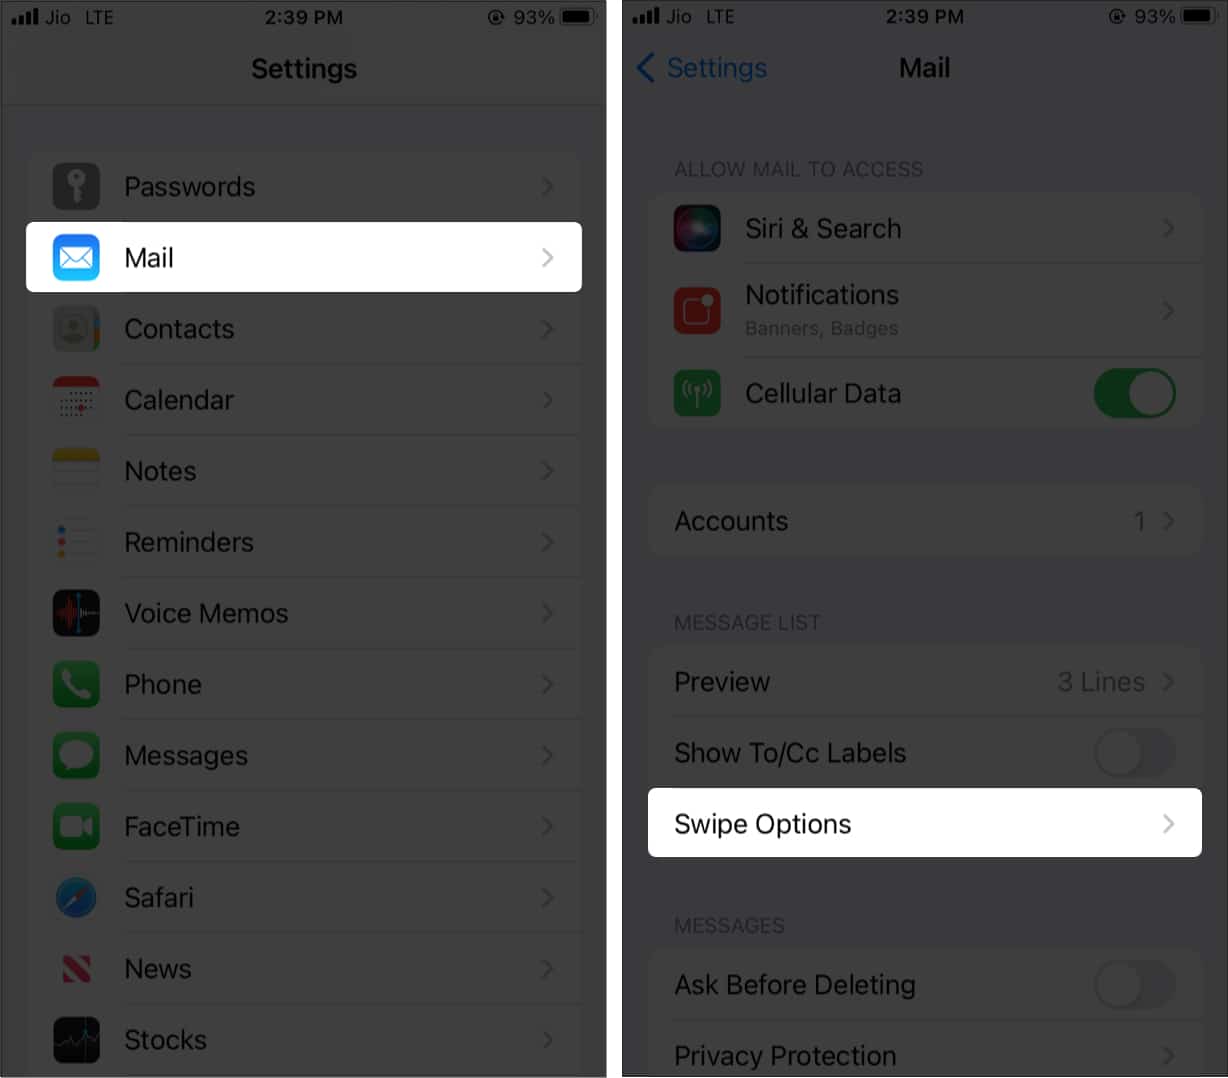 In iPhone Settings tap Mail and Swipe Options